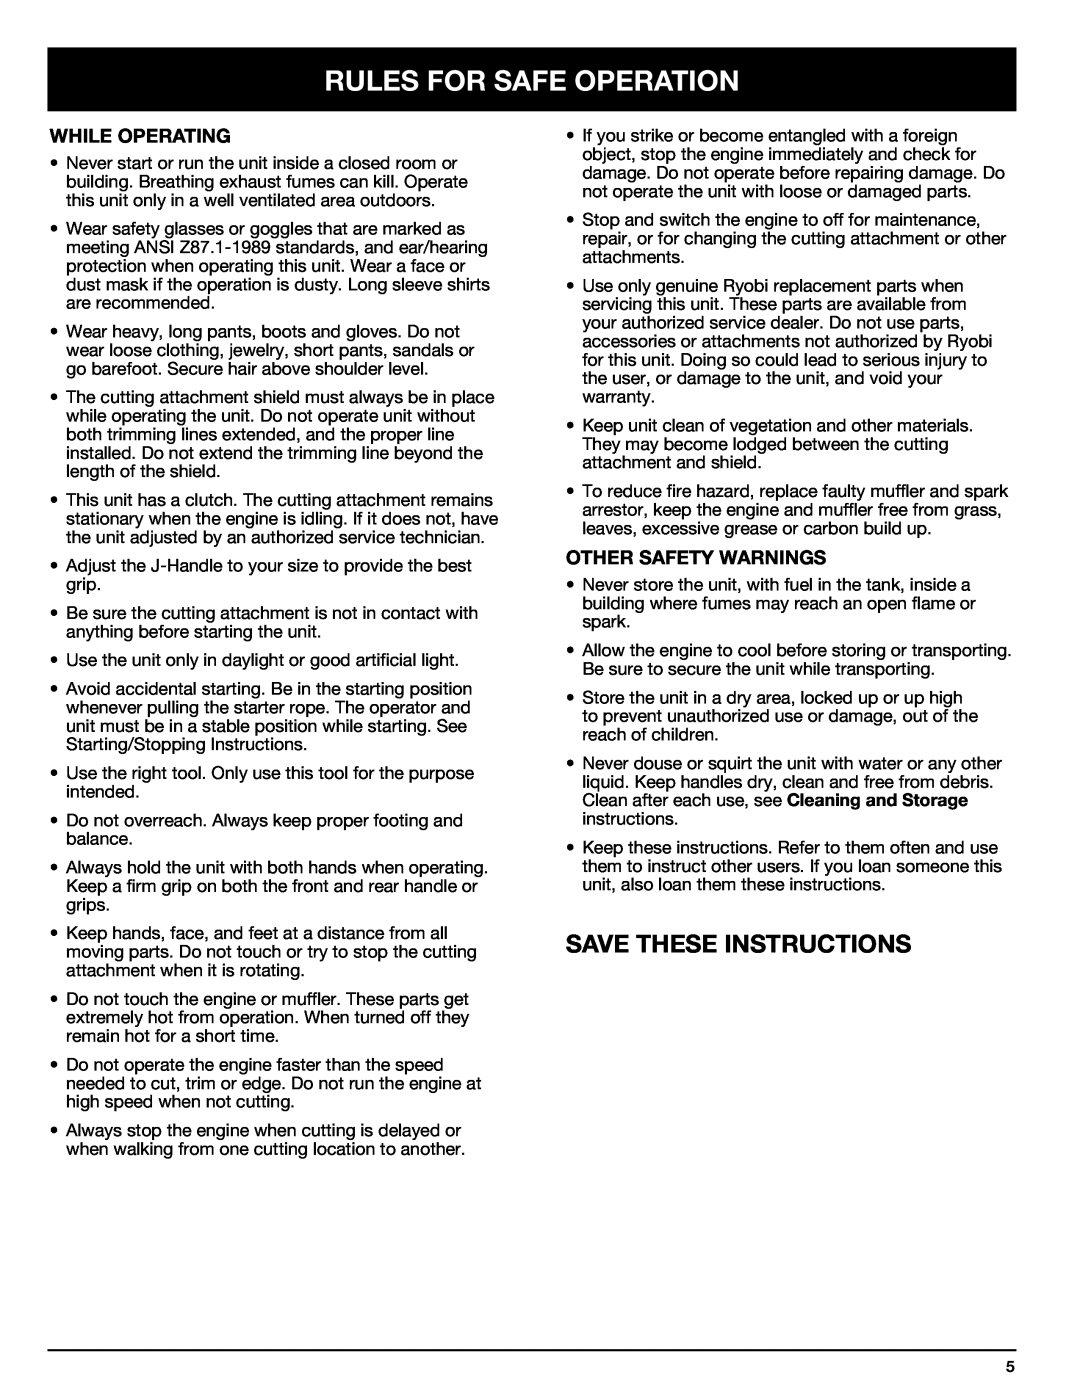 Ryobi Outdoor 875r manual Save These Instructions, While Operating, Other Safety Warnings, Rules For Safe Operation 